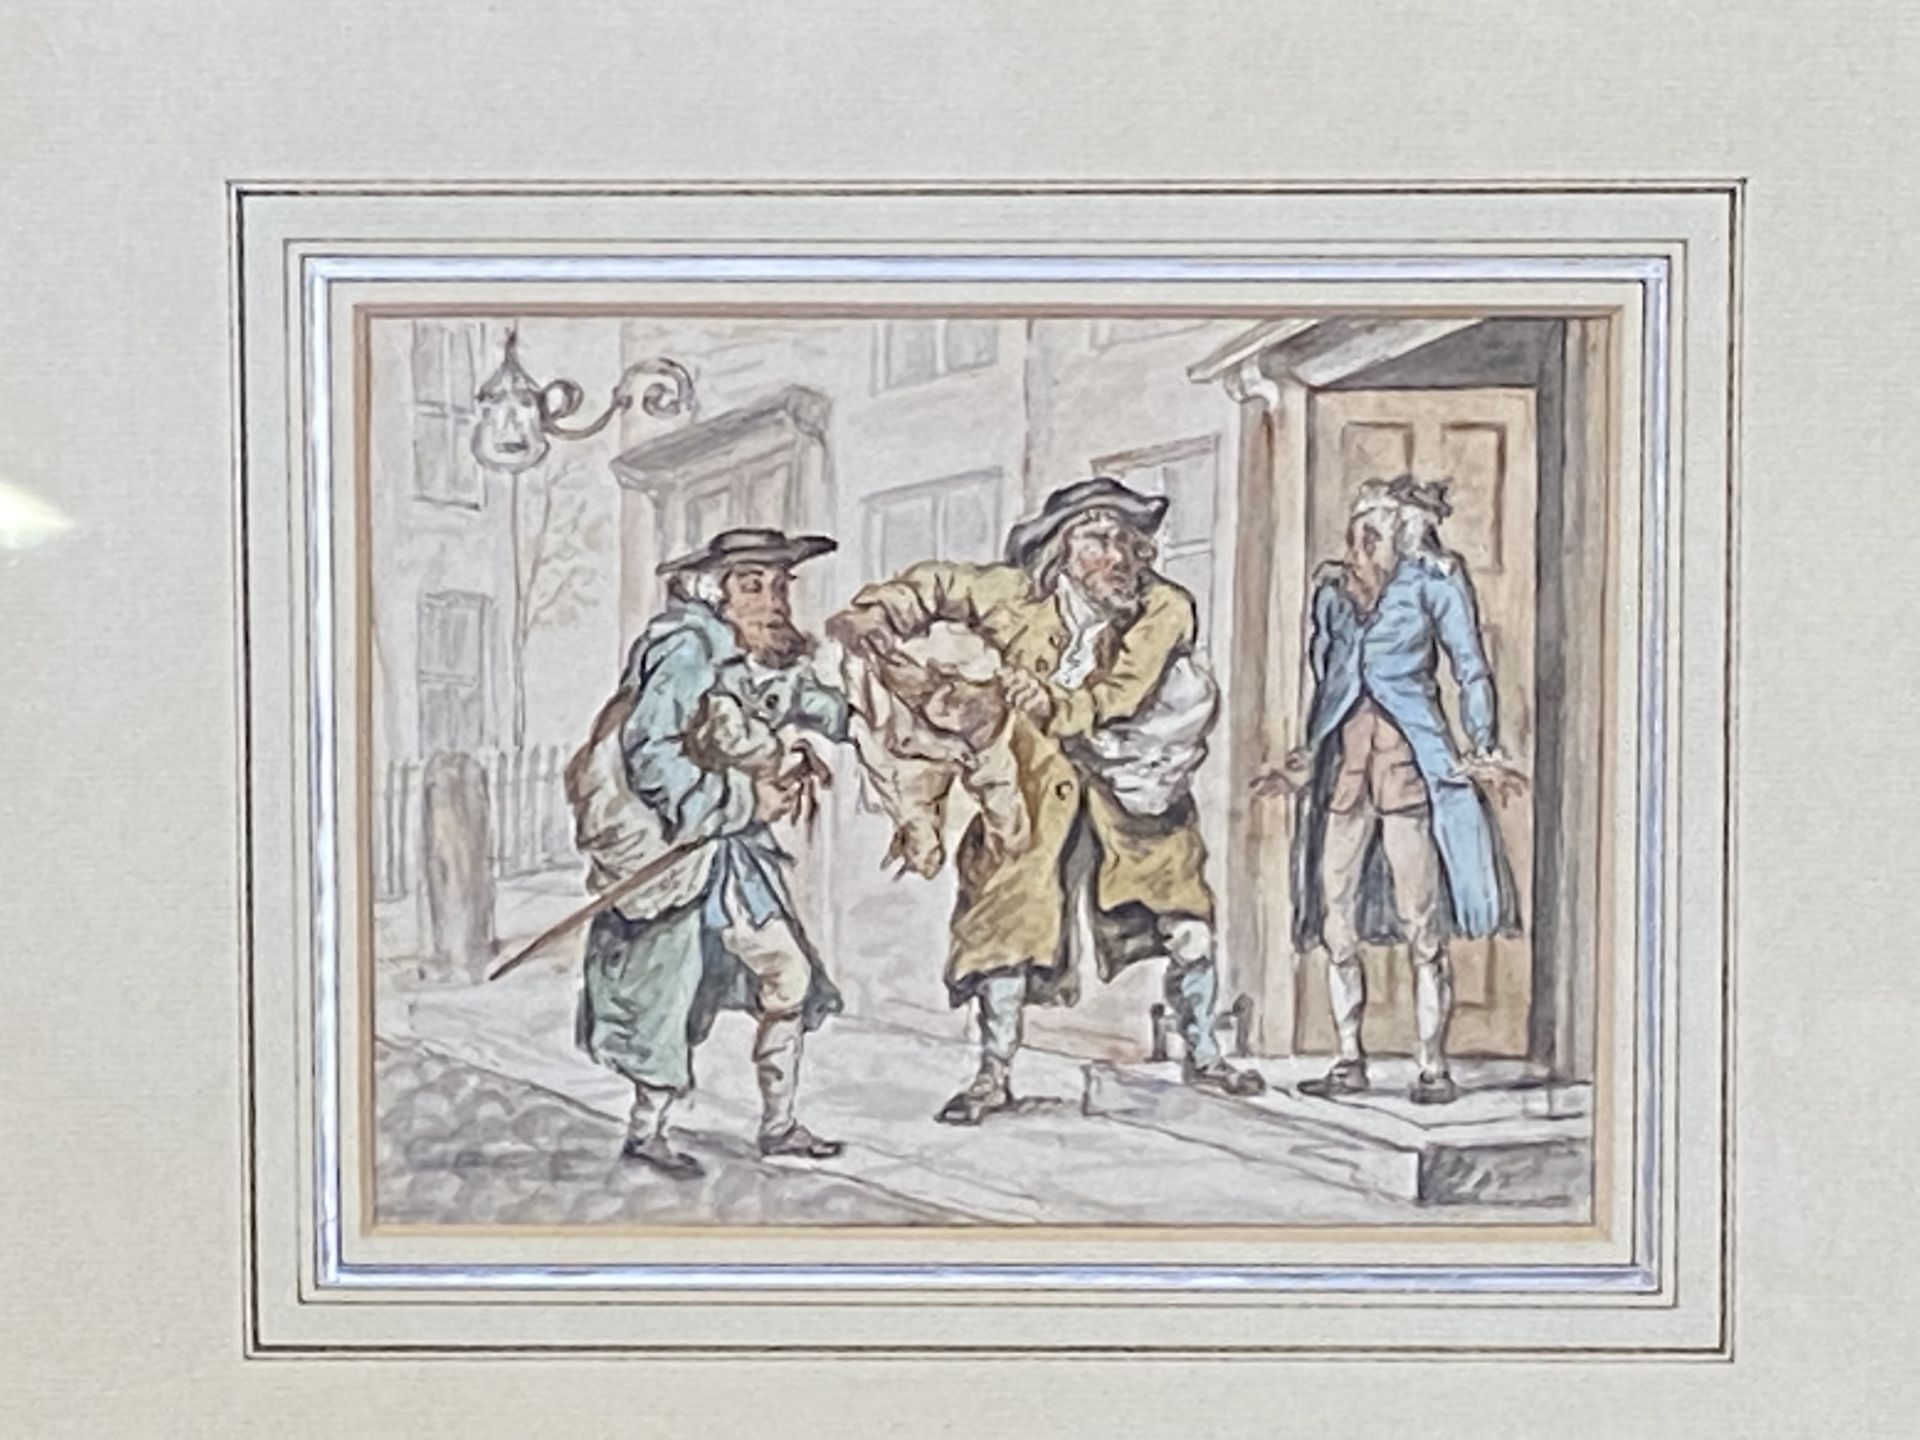 Framed and glazed watercolour, The Old Clothes Dealers, Henry William Bunbury